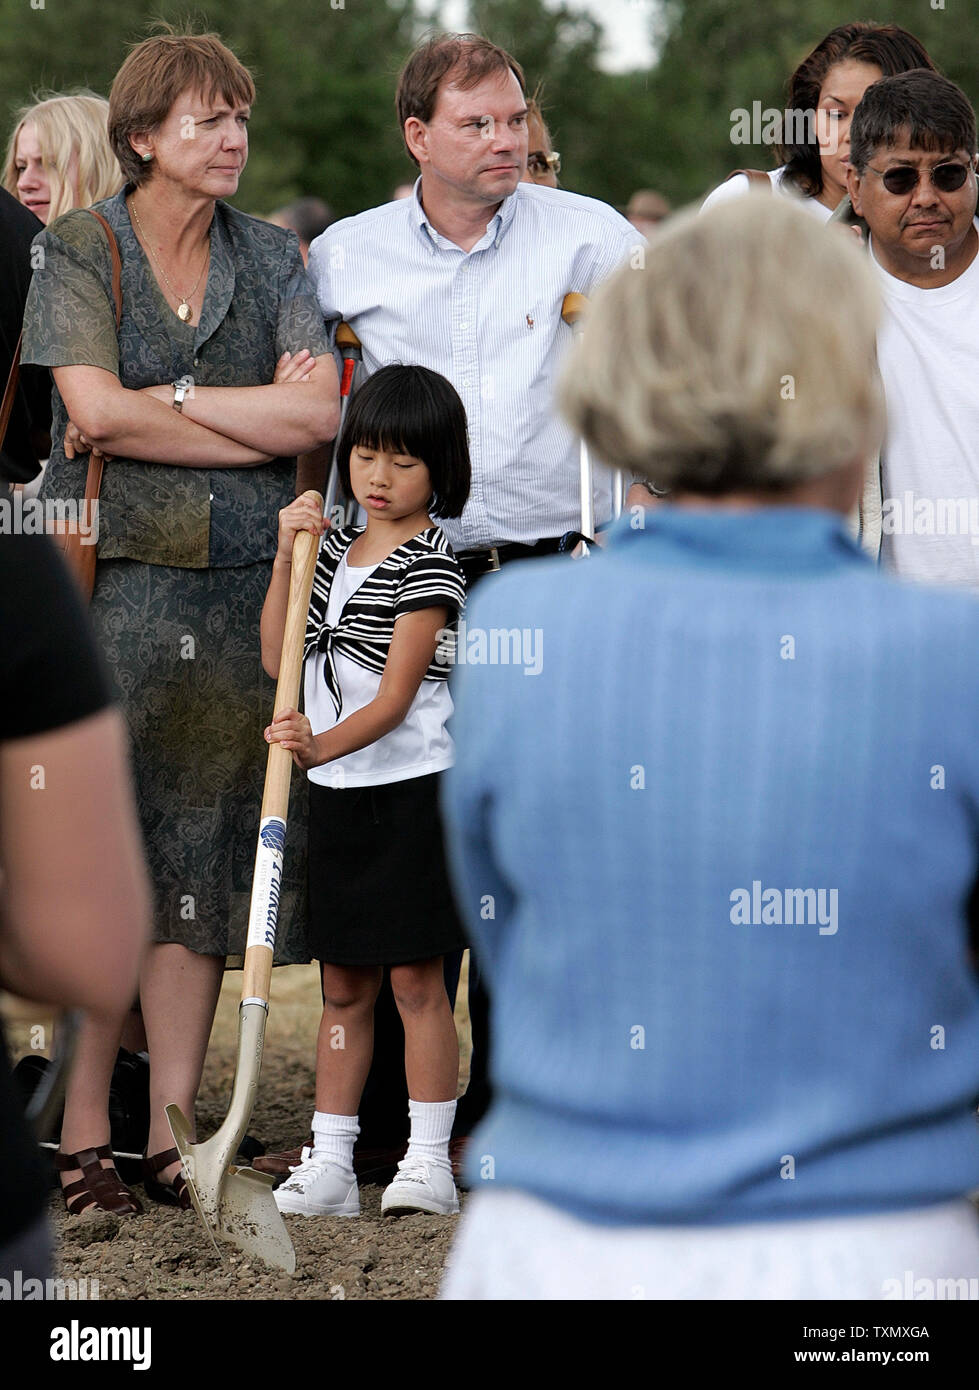 Tom Mauser (C) stands next to his adopted daughter Madeline HaiXing Mauser (bottom) at the official Columbine memorial groundbreaking ceremony at Clement Park in Littleton, Colorado June 16, 2006.  Mauser's son Daniel was shot and killed during the Columbine massacre.  Former President Bill Clinton spoke at the groundbreaking ceremony to help raise the remaining money for the $1.5 million dollar memorial.  The Columbine memorial will be at the base of Rebel hill near Columbine high school where on April 20, 1999, Dylan Klebold and Eric Harris terrorized the school killing one teacher and twelv Stock Photo